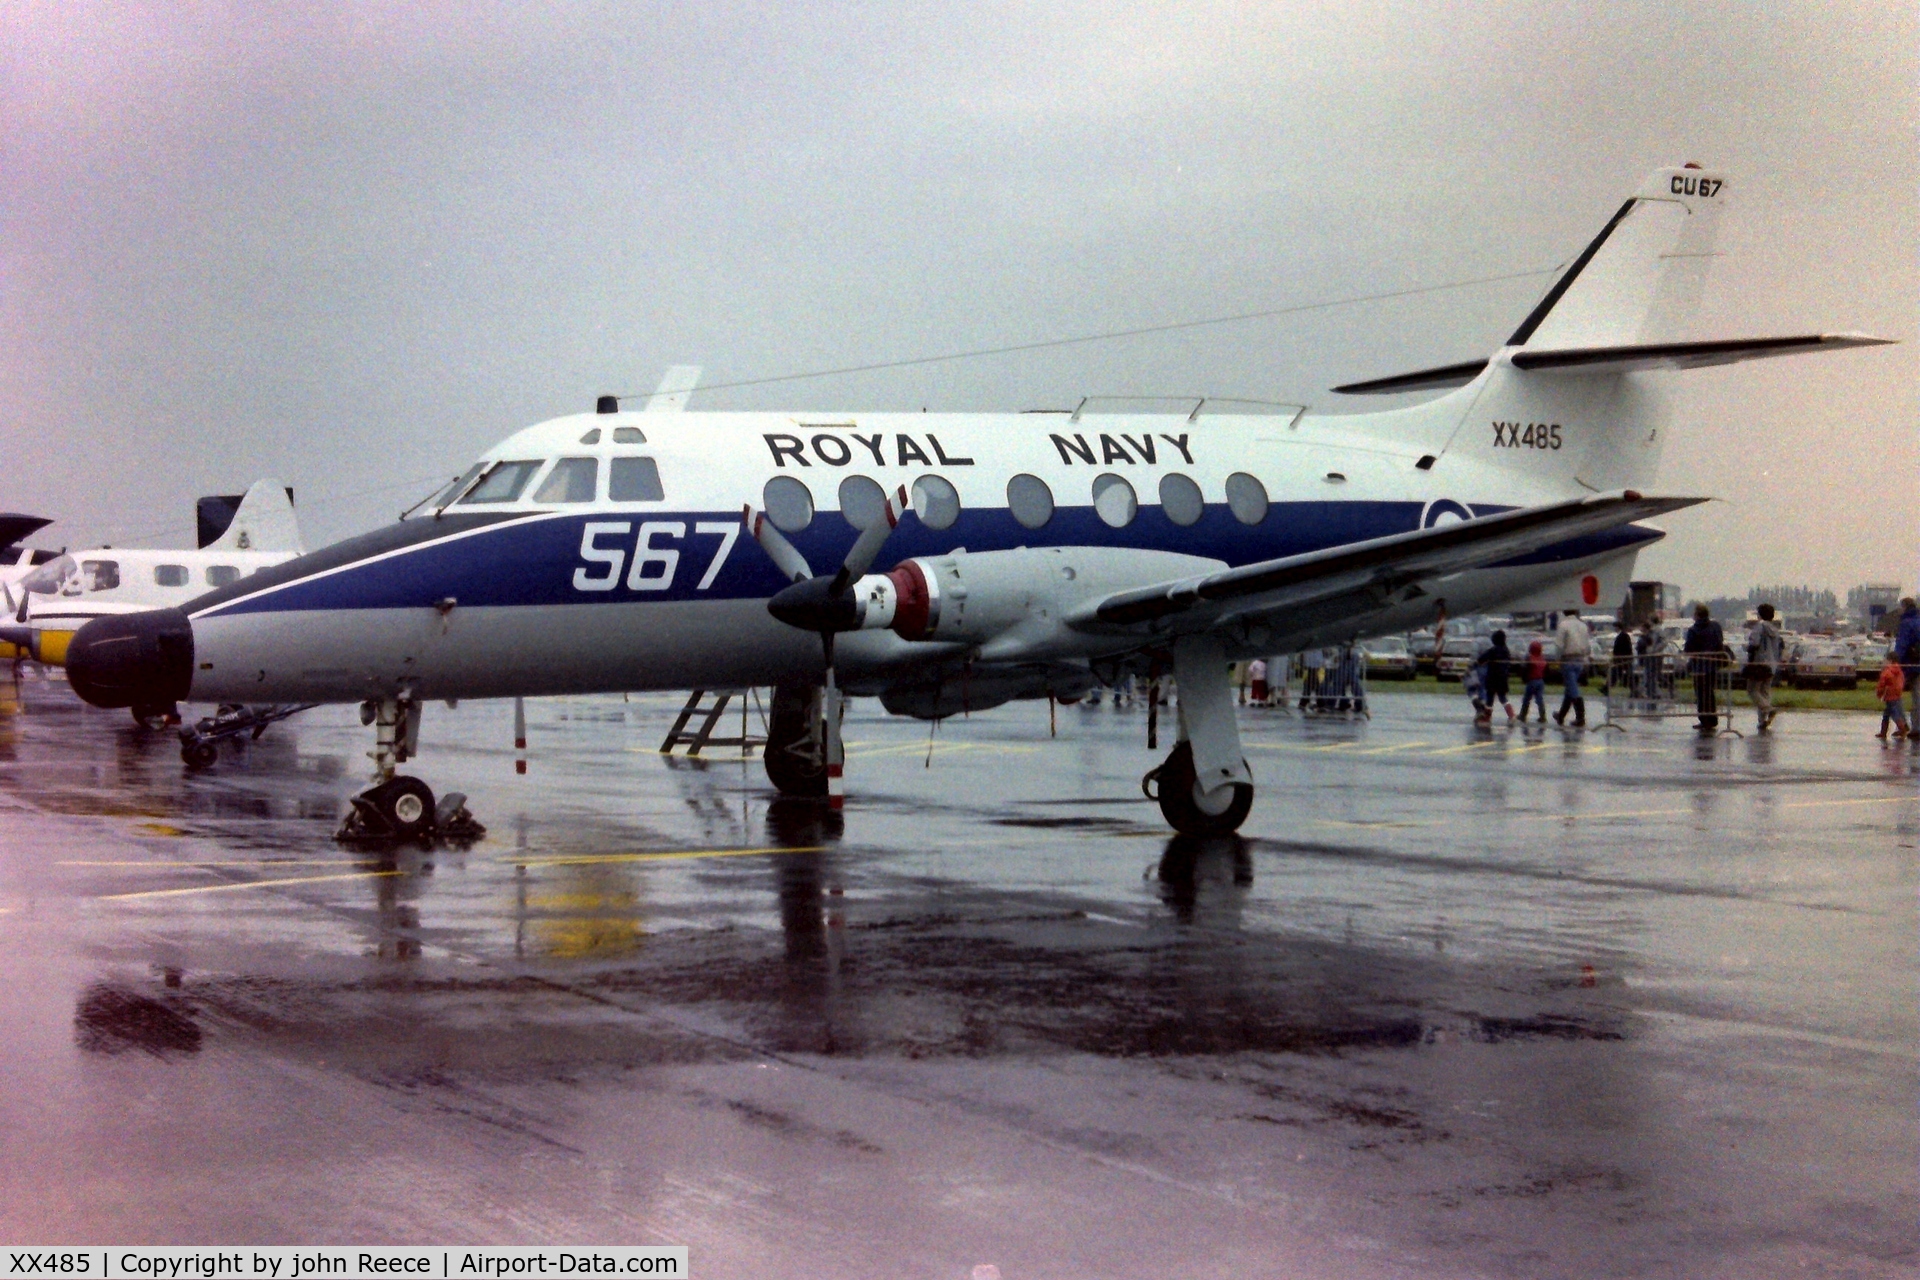 XX485, 1974 Scottish Aviation HP-137 Jetstream T.2 C/N 268, At a rainy Finningley airshow late 1970's or early 1980's